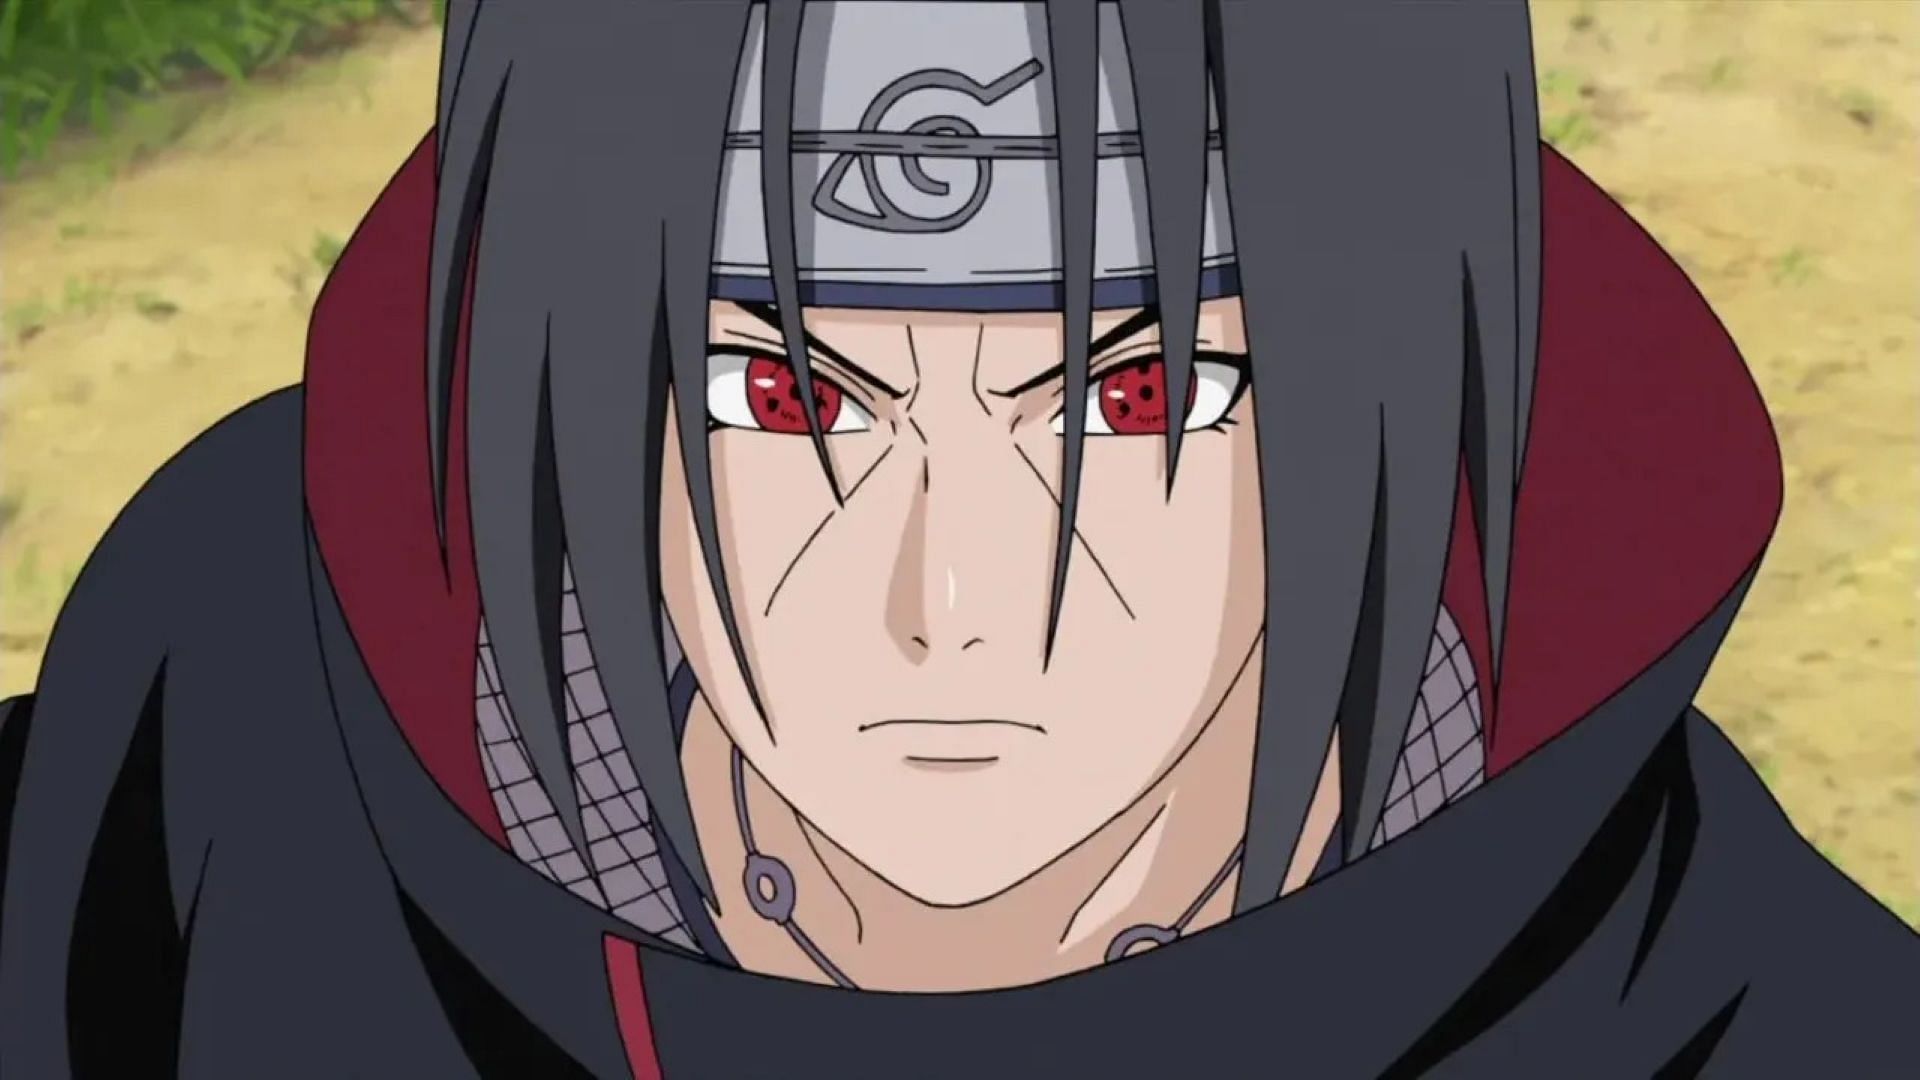 Itachi is one of the most complex characters in Naruto (Image via Studio Pierrot)